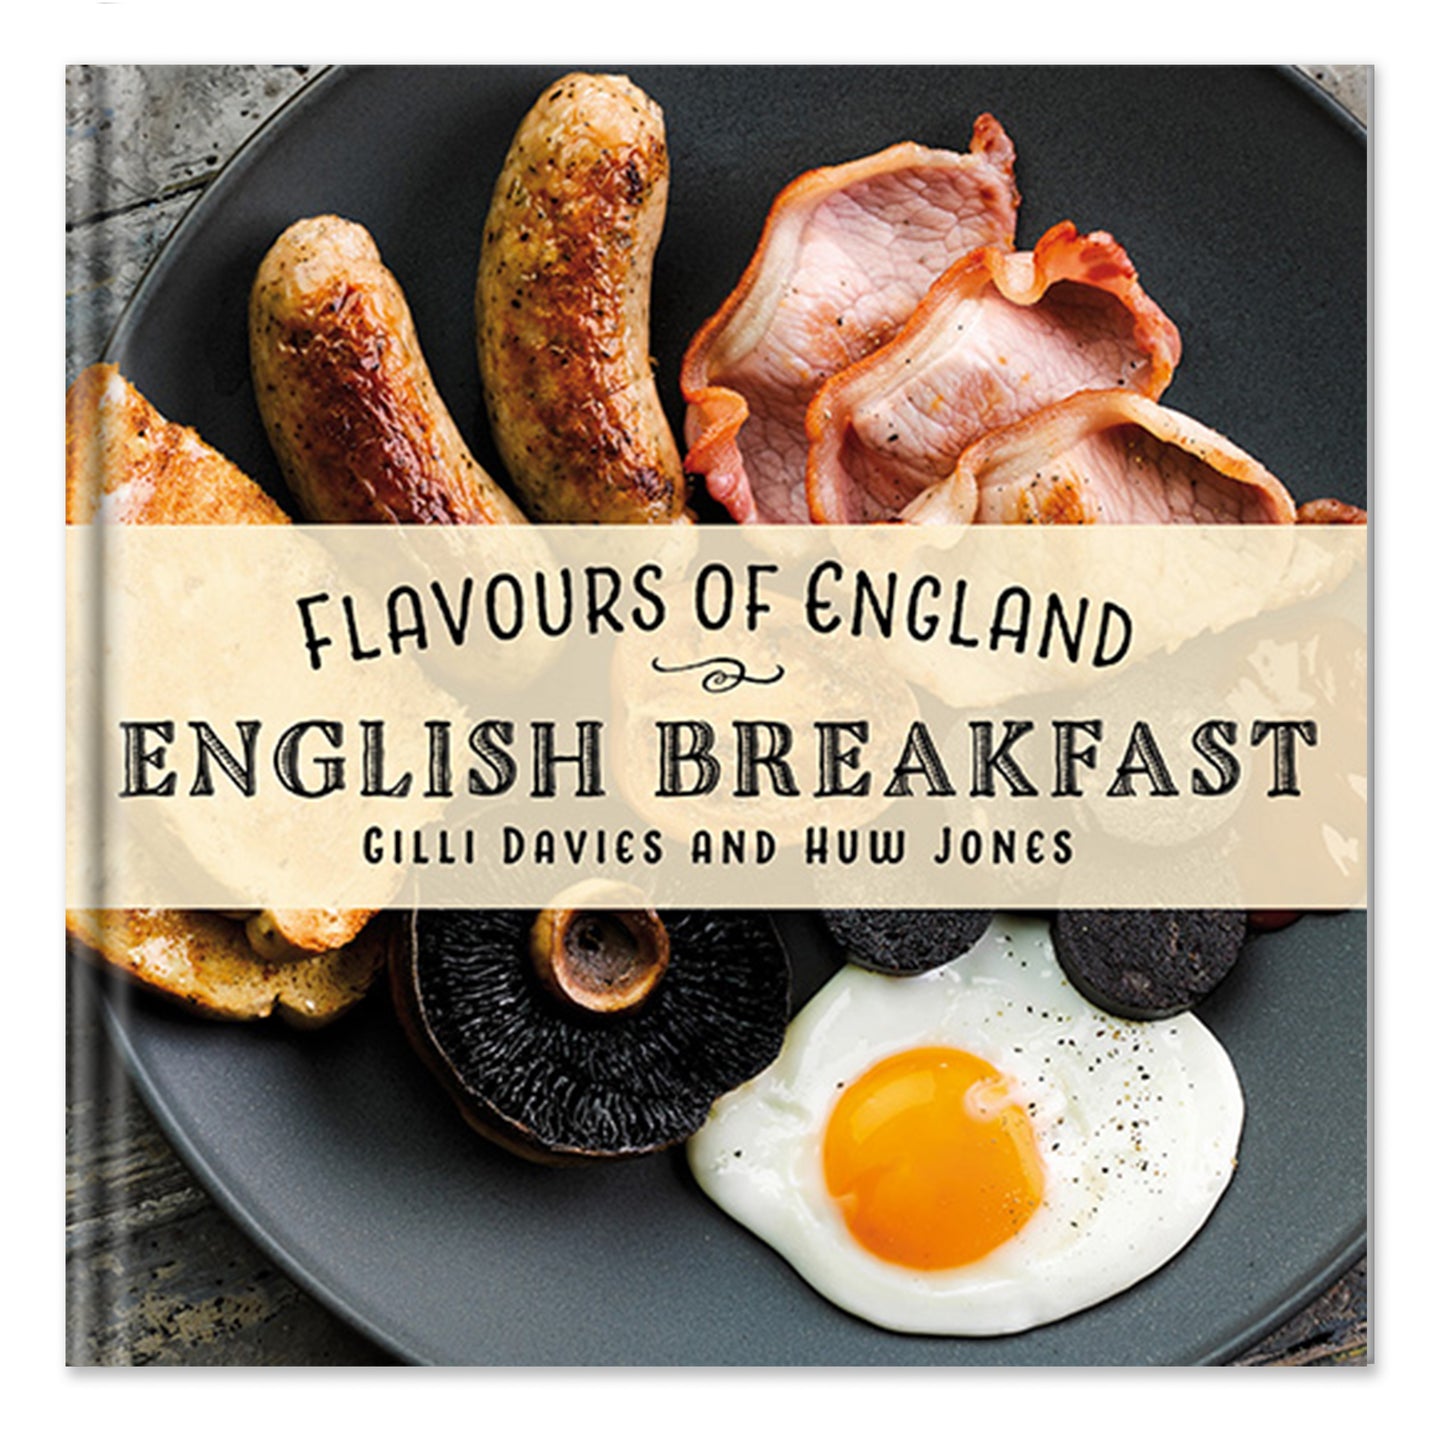 Flavours of England English Breakfast Gilli Davies Huw Jones published by Graffeg